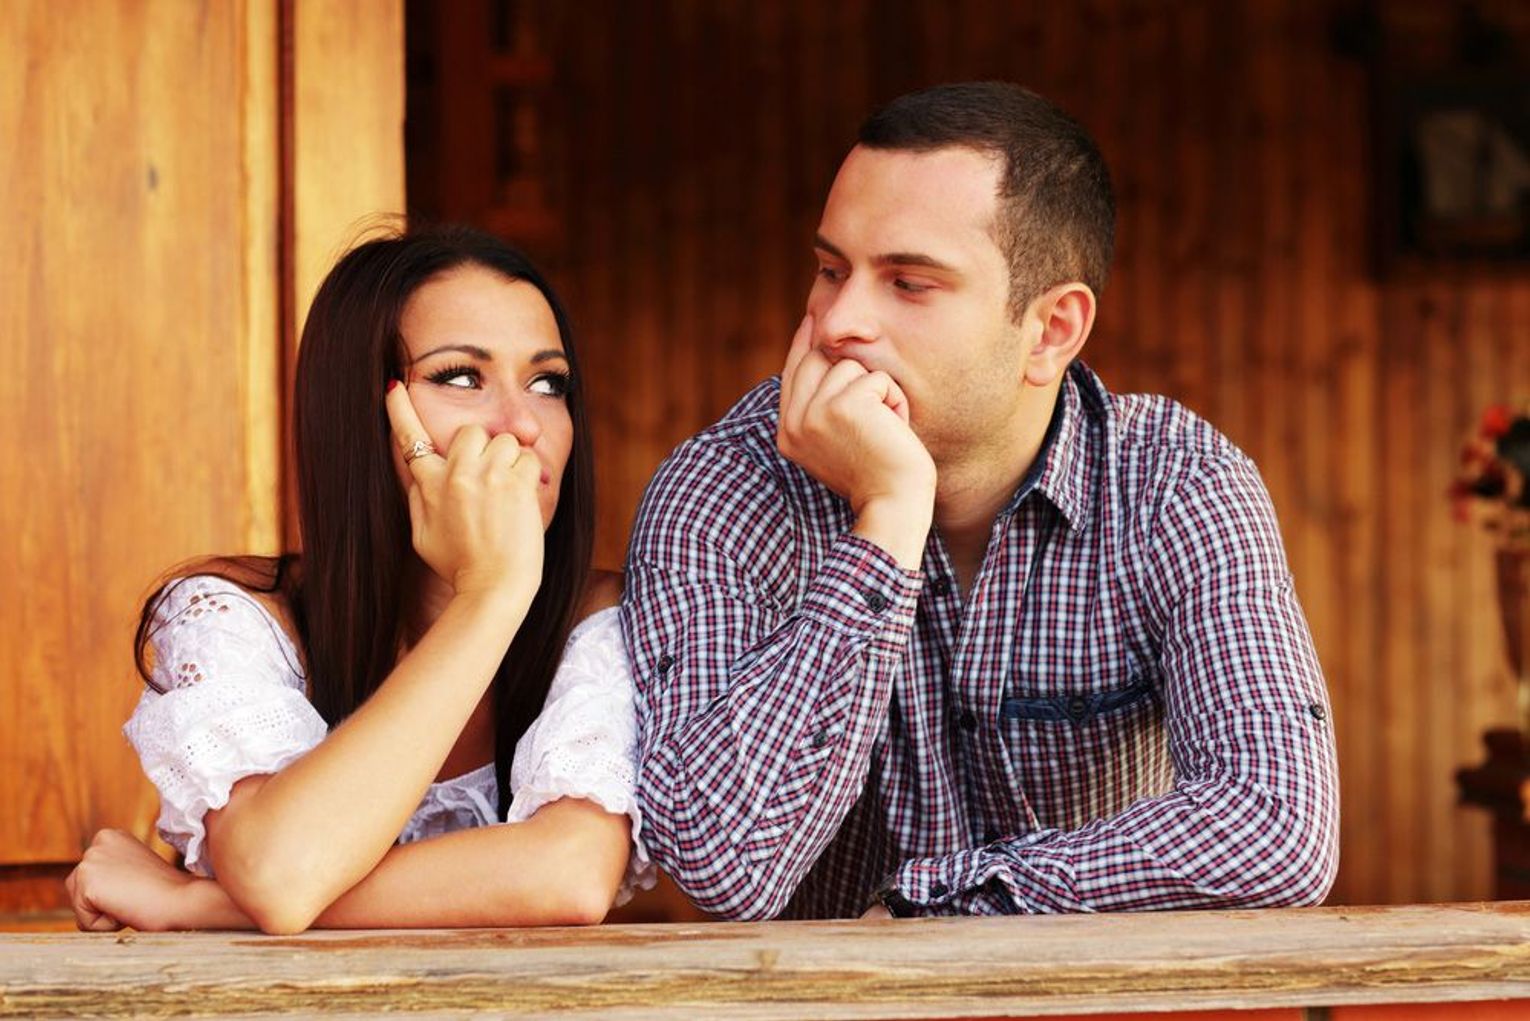 8 Simple Rules for Dating Your Ex